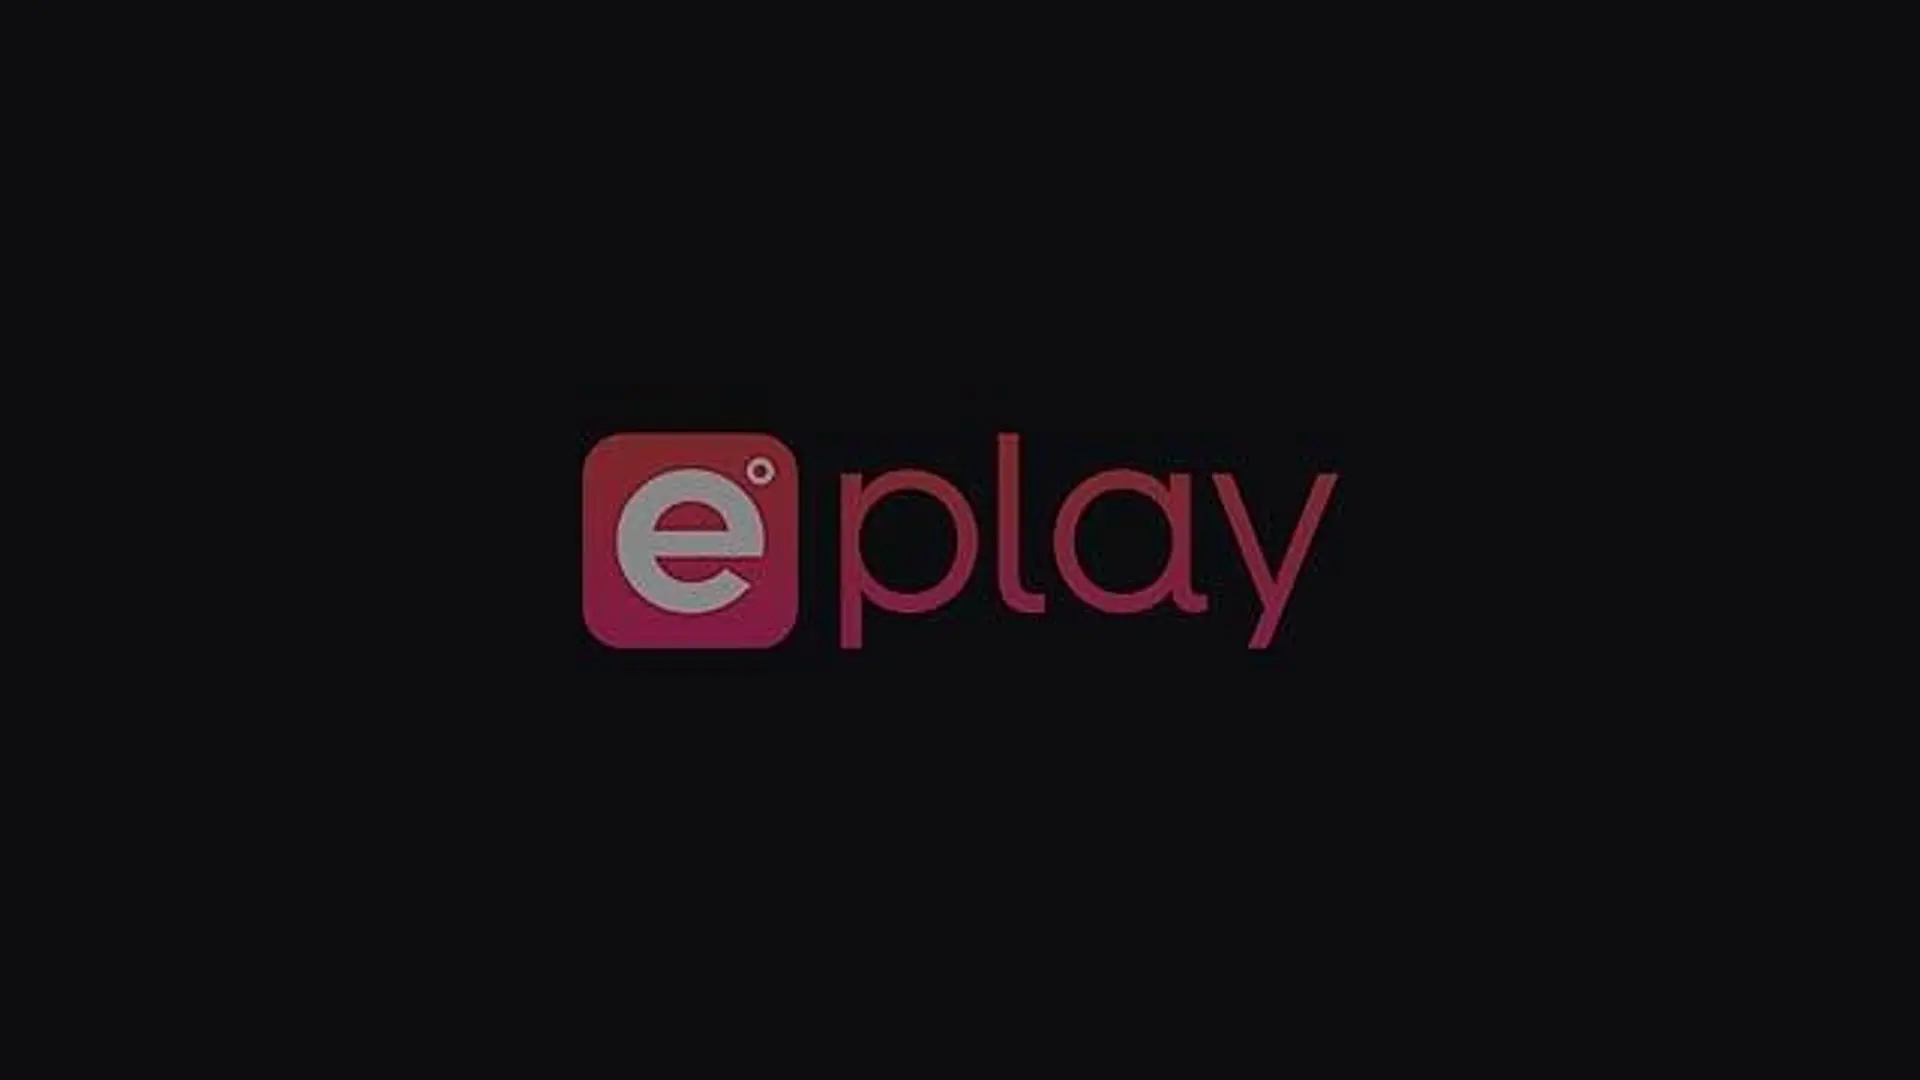 EmGreens's ePlay Channel